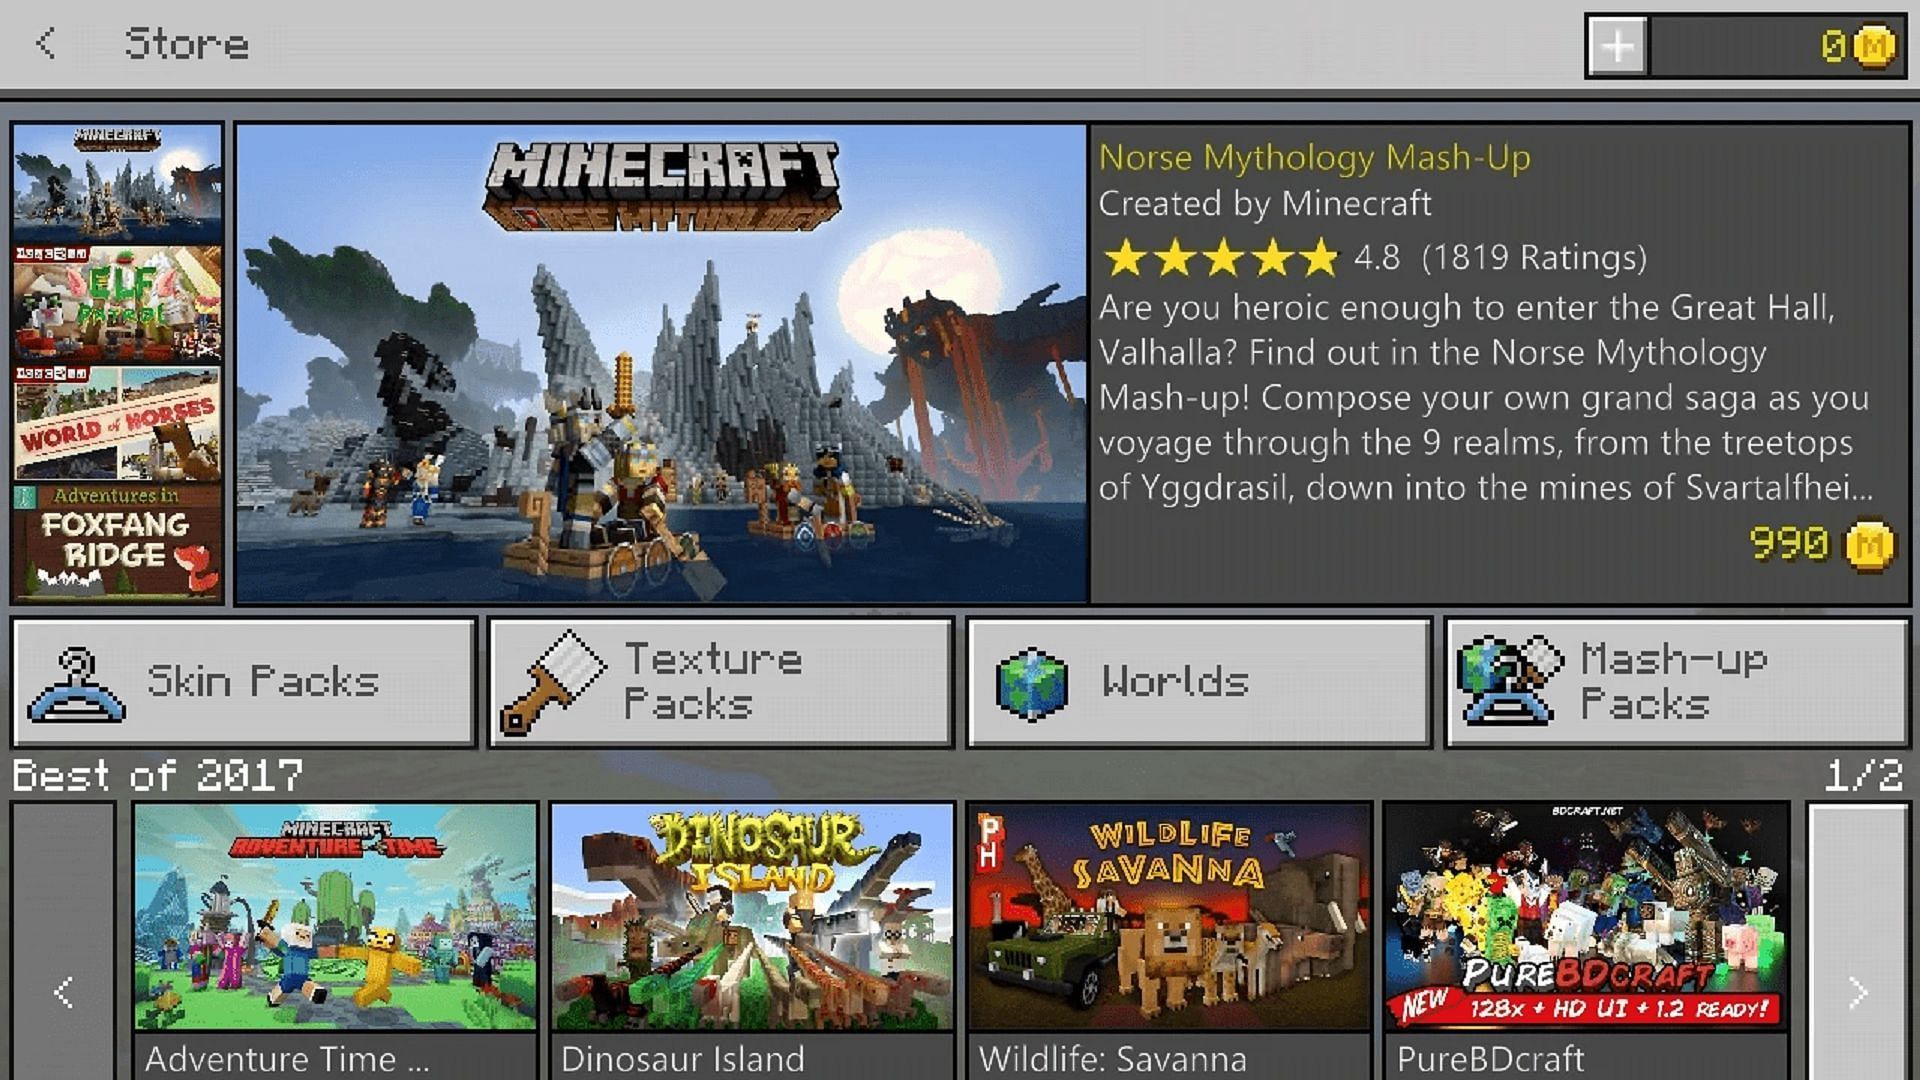 A 2017 landing page for the Minecraft Marketplace (Image via Mojang)